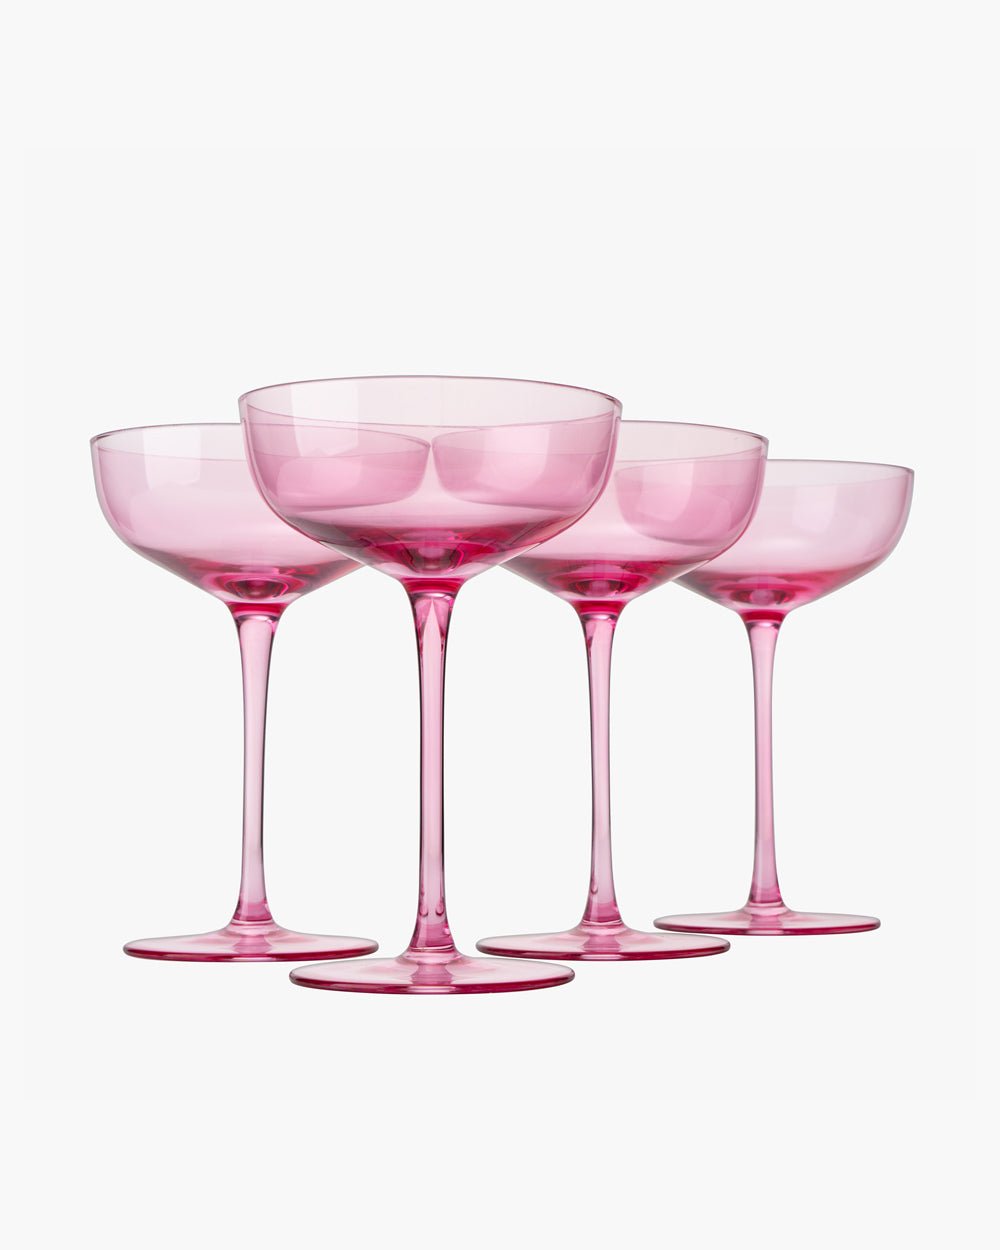 ROSE COUPE GLASSES (SET OF 4) - Shop Cupcakes and Cashmere